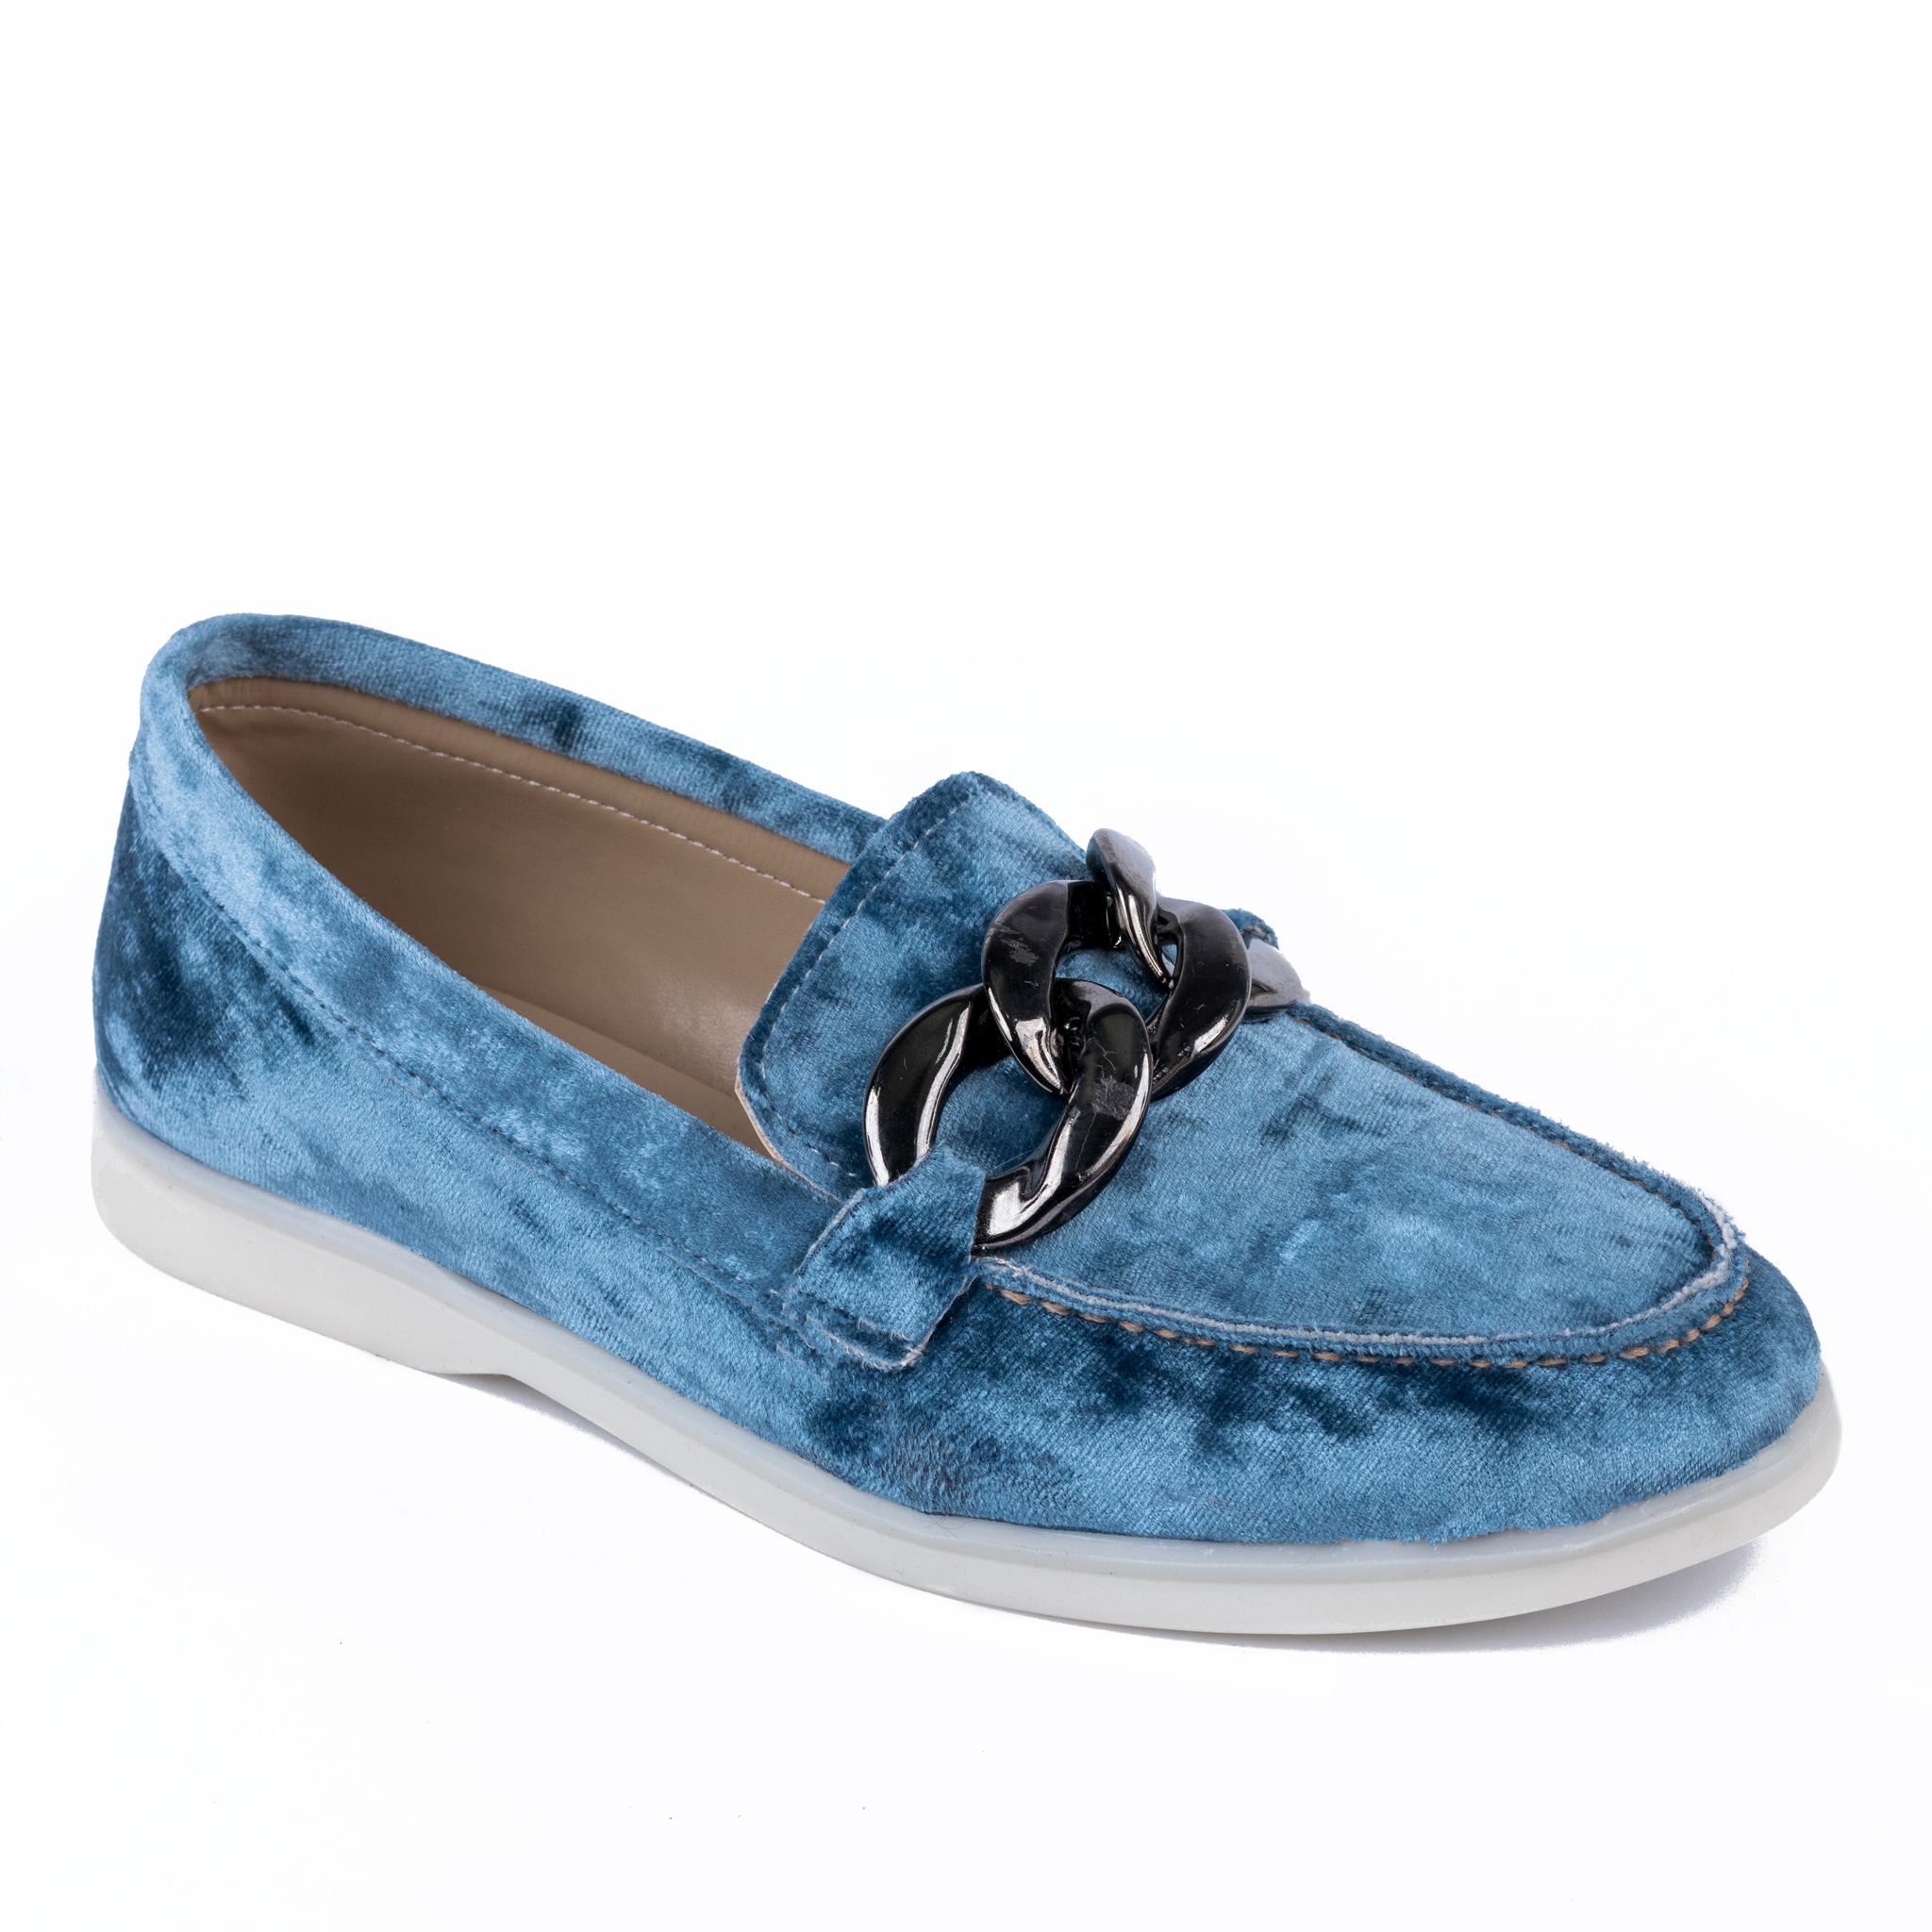 PLUSH MOCCASINS WITH CHAIN - BLUE